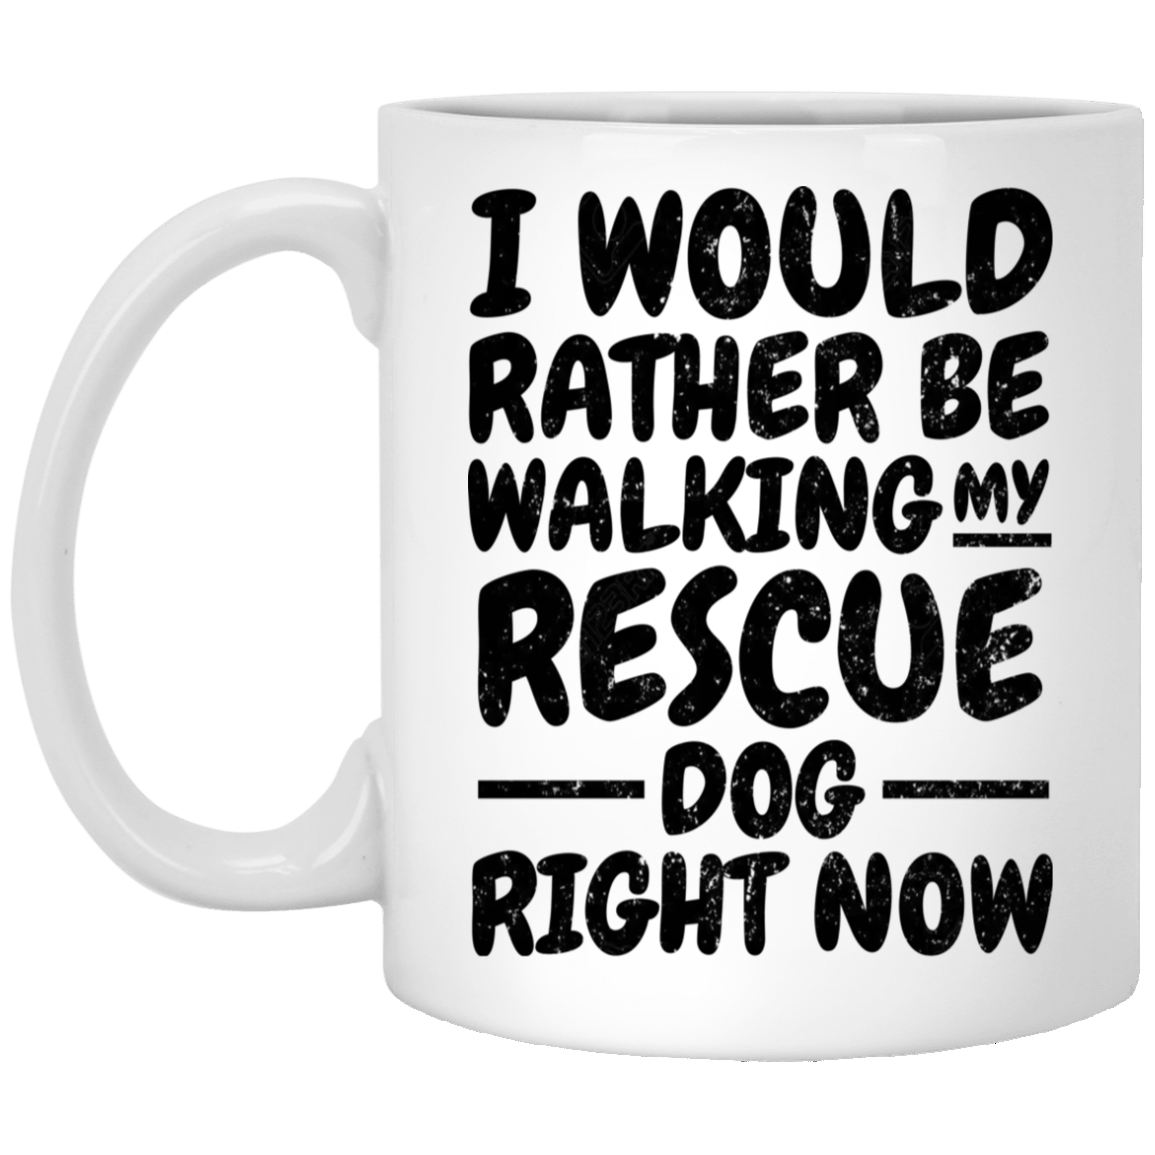 I Would Rather Be - Mugs.